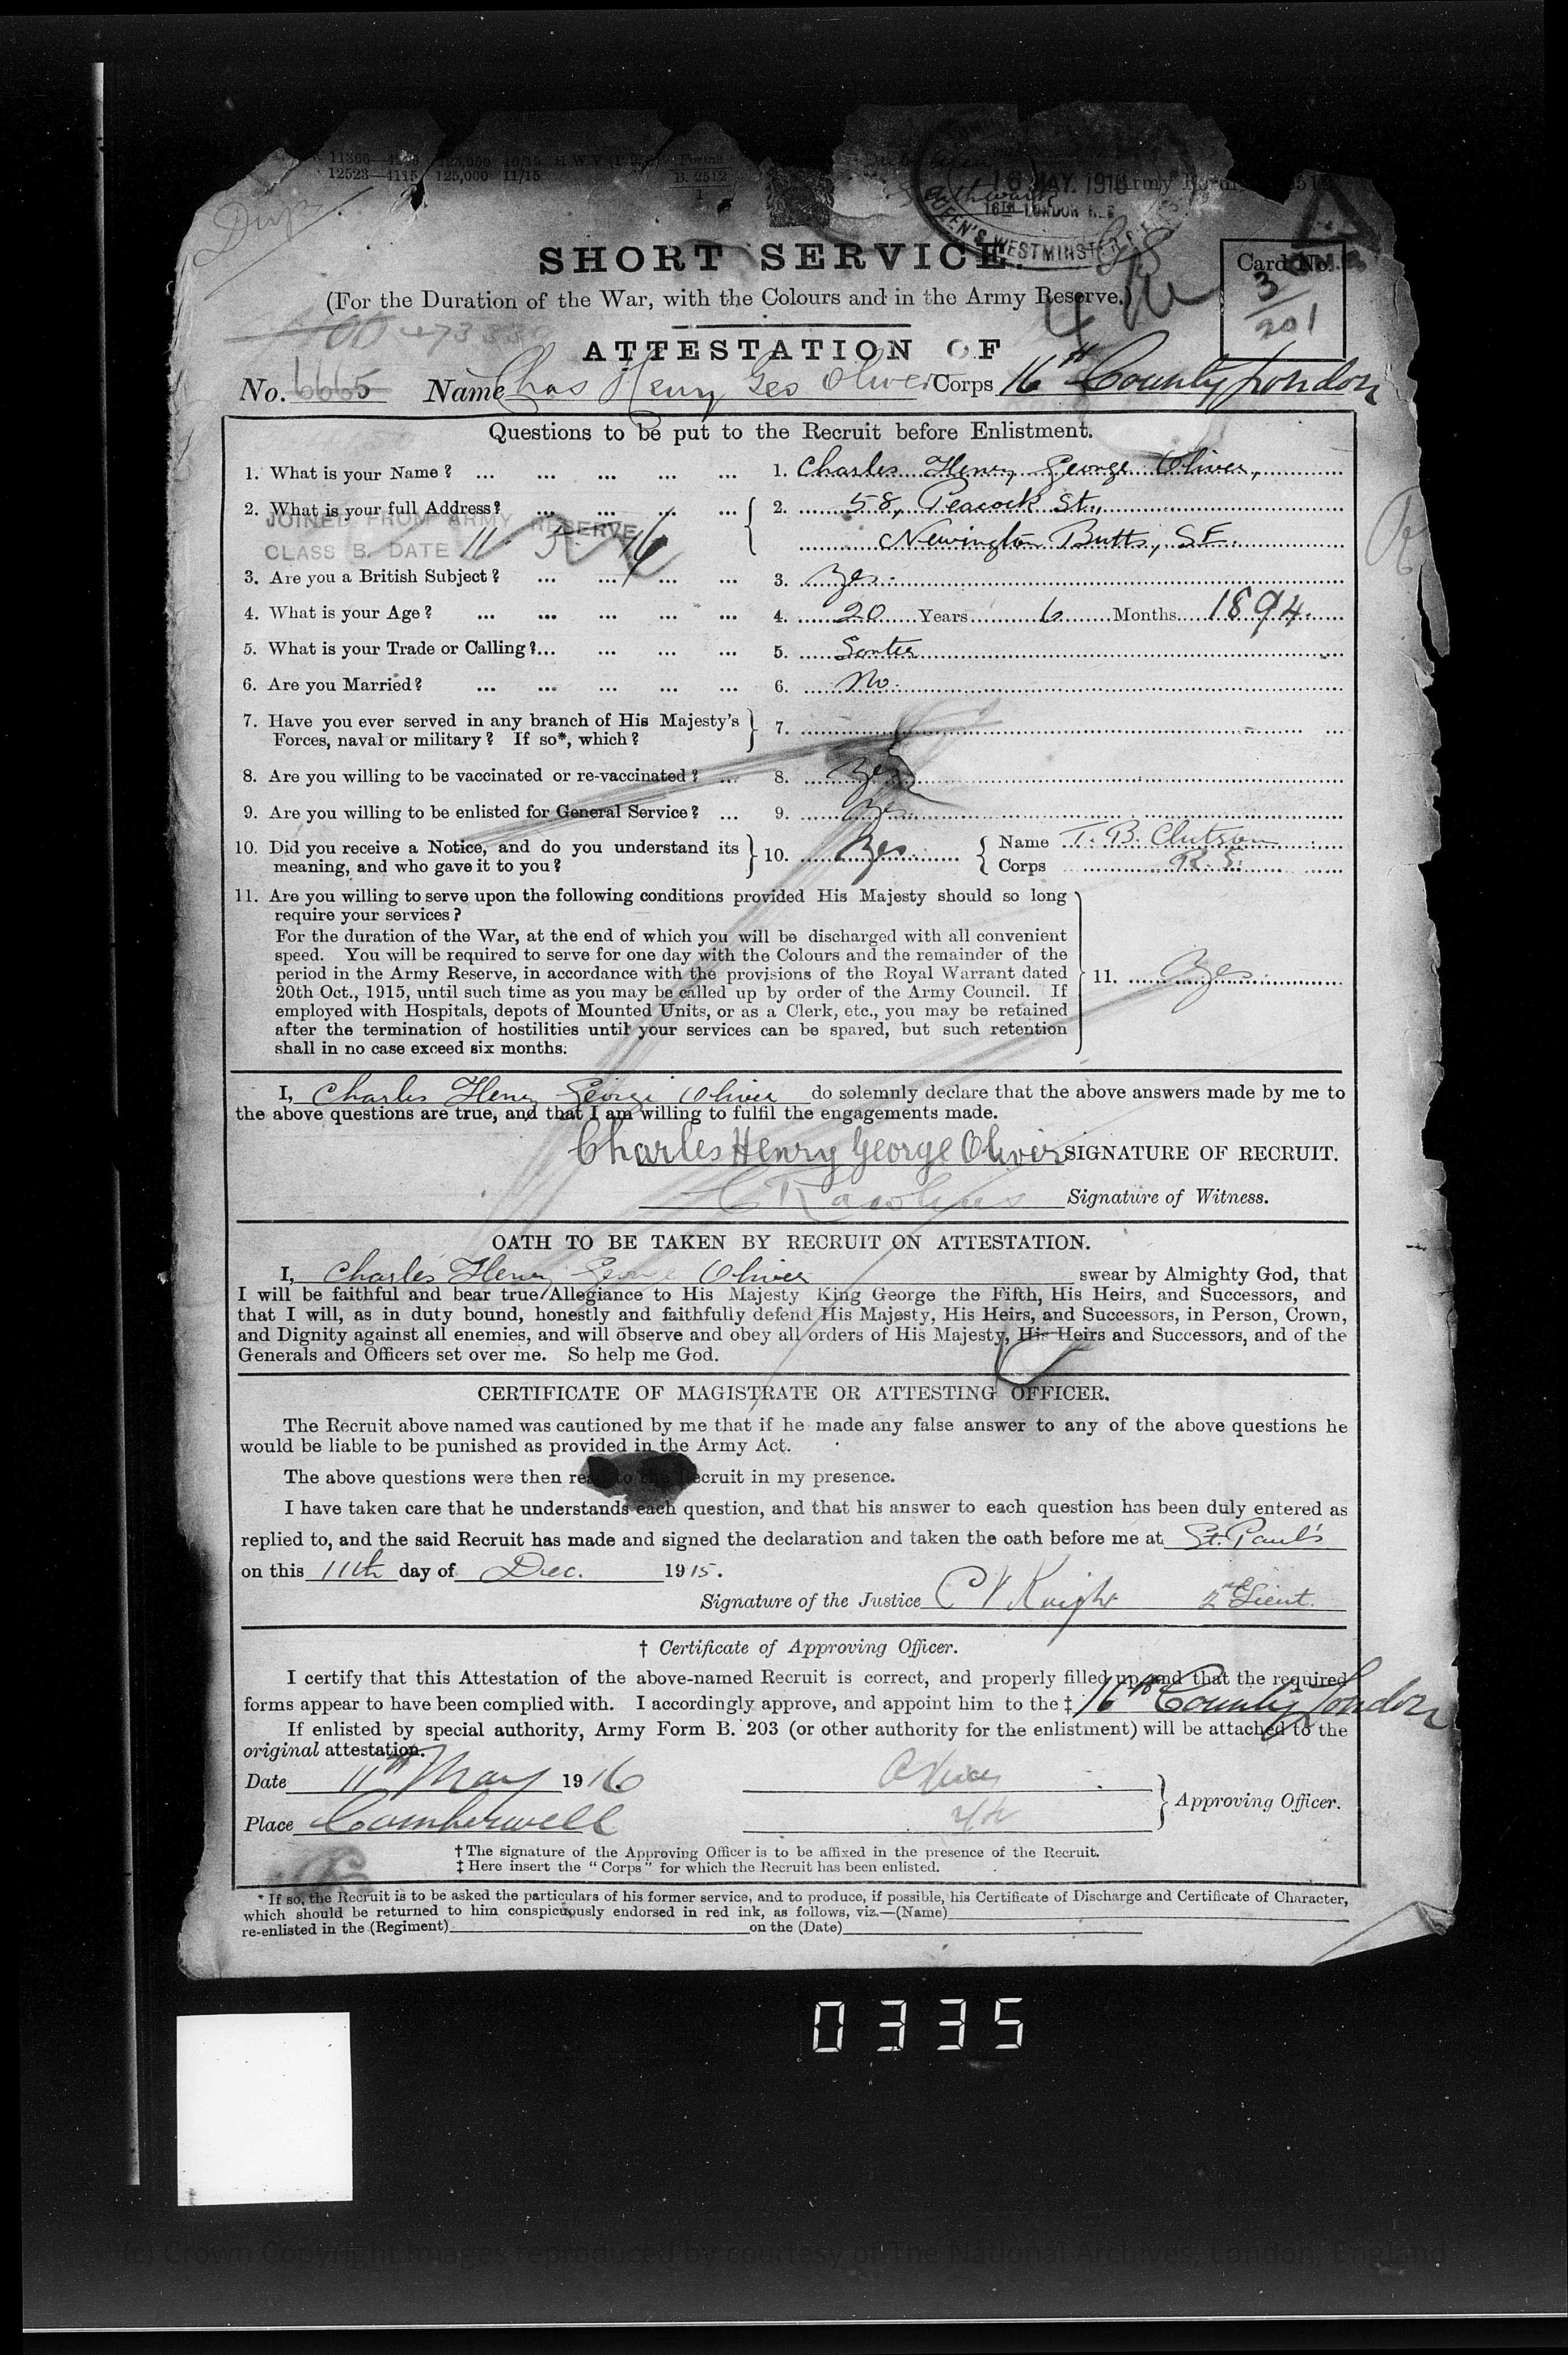 Military papers for Charles Oliver in 1915